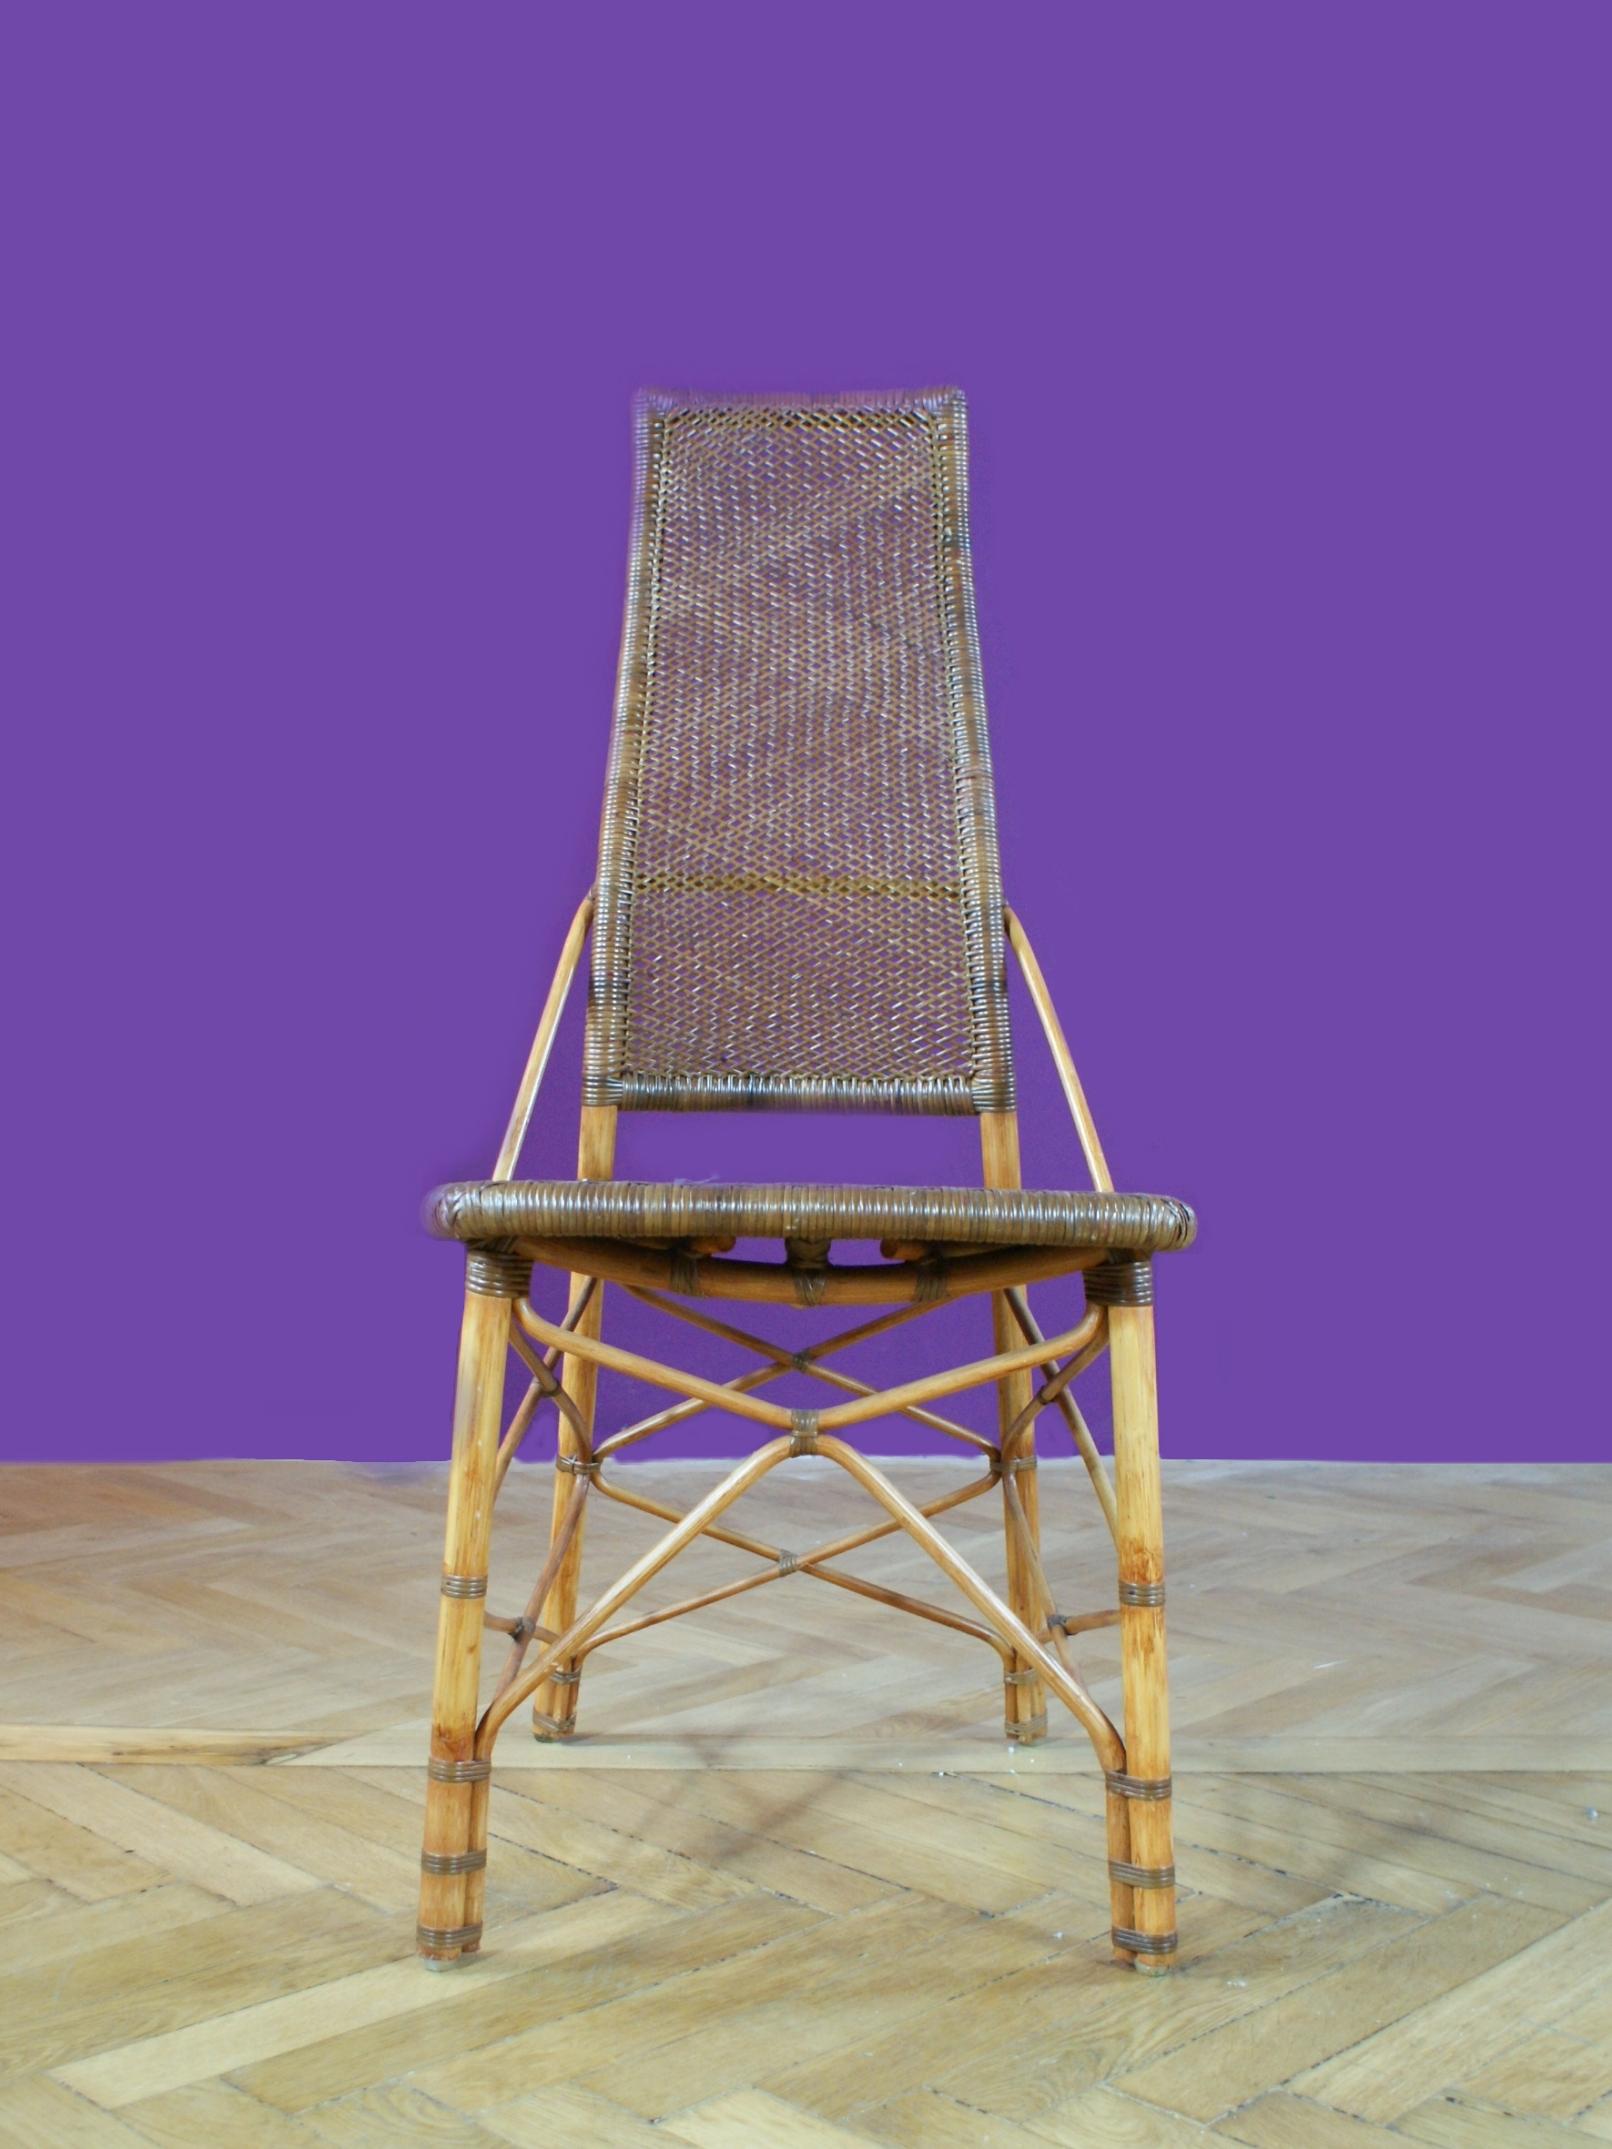 bamboo rattan dining chairs